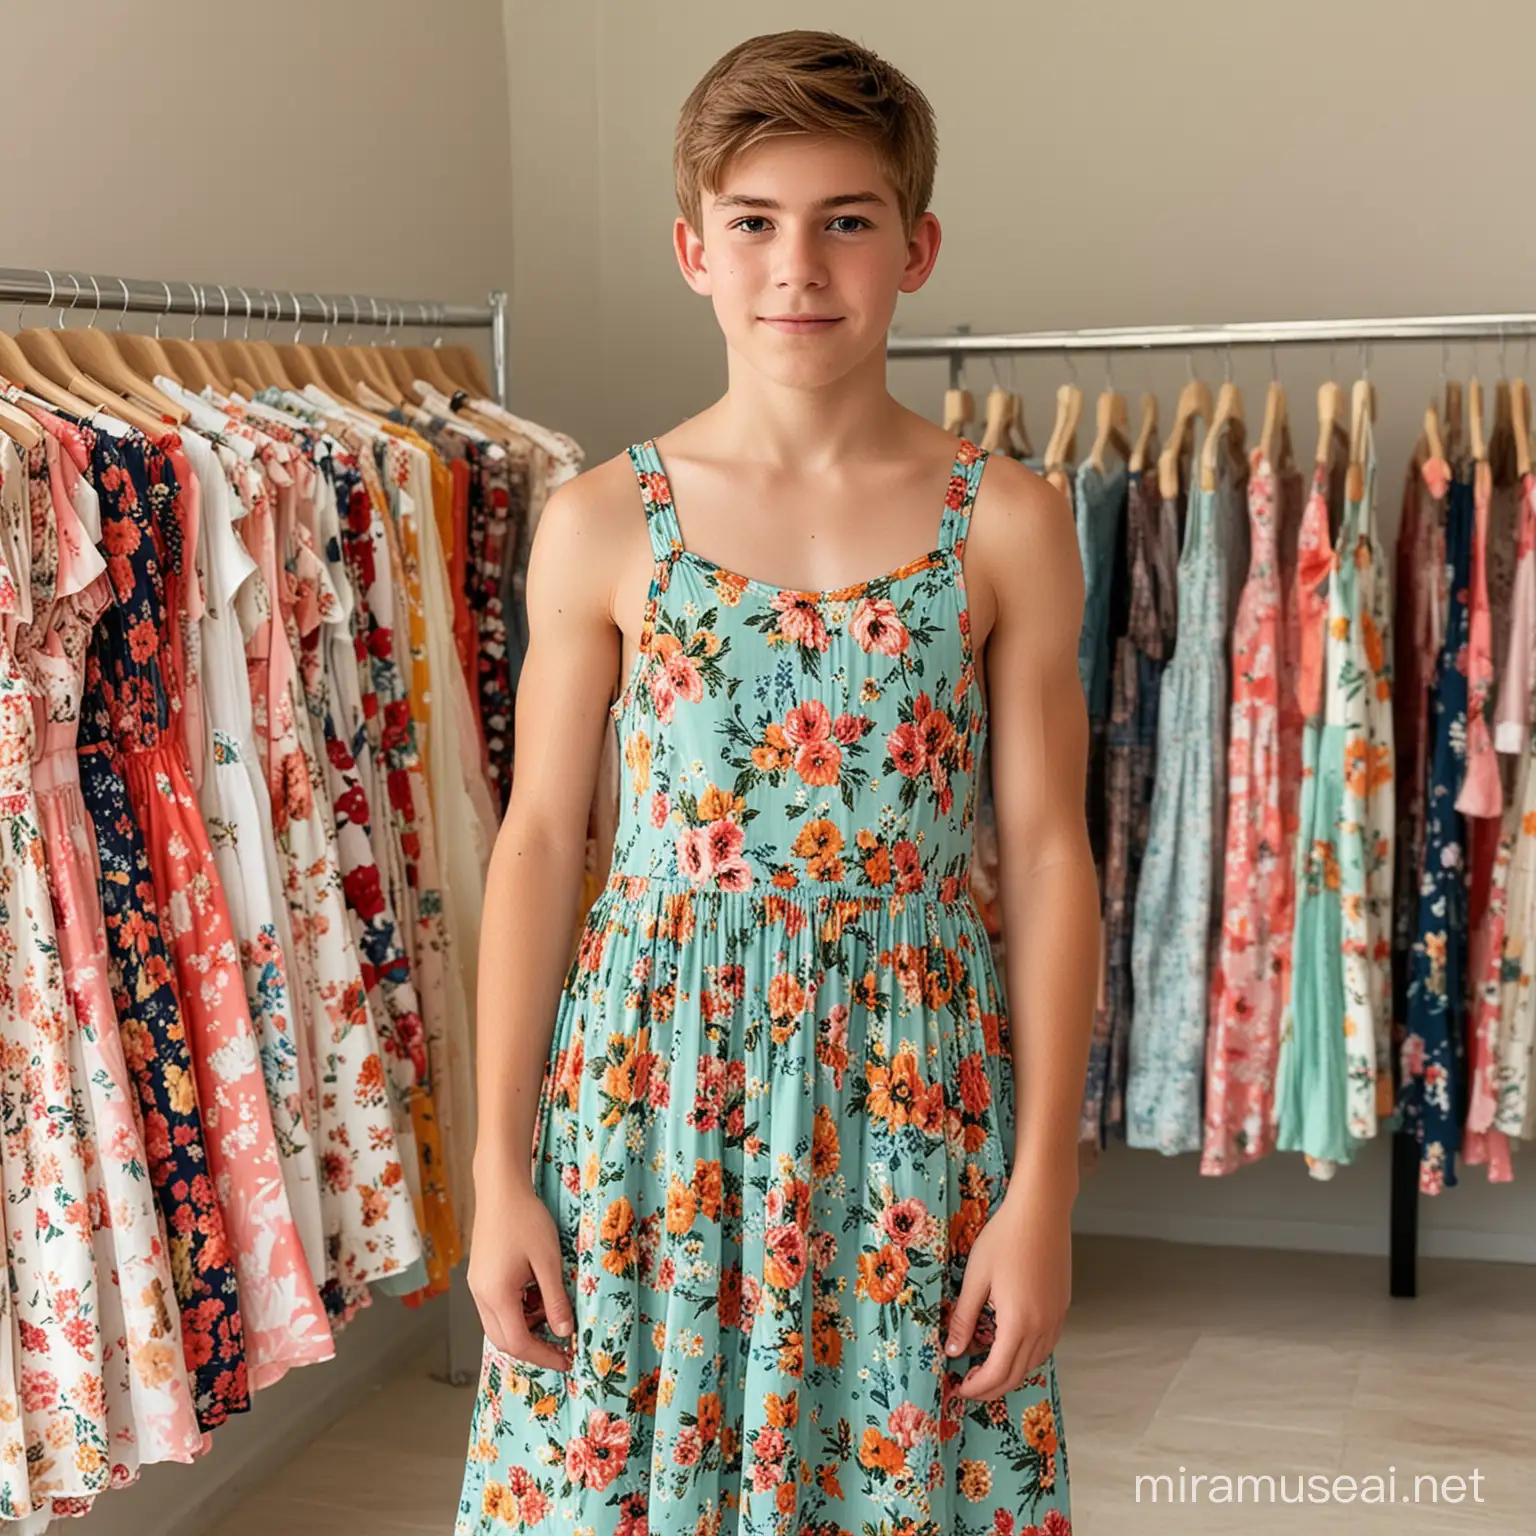 teenage boy has to try on and pose in a floral a-line summer dress in a boutique